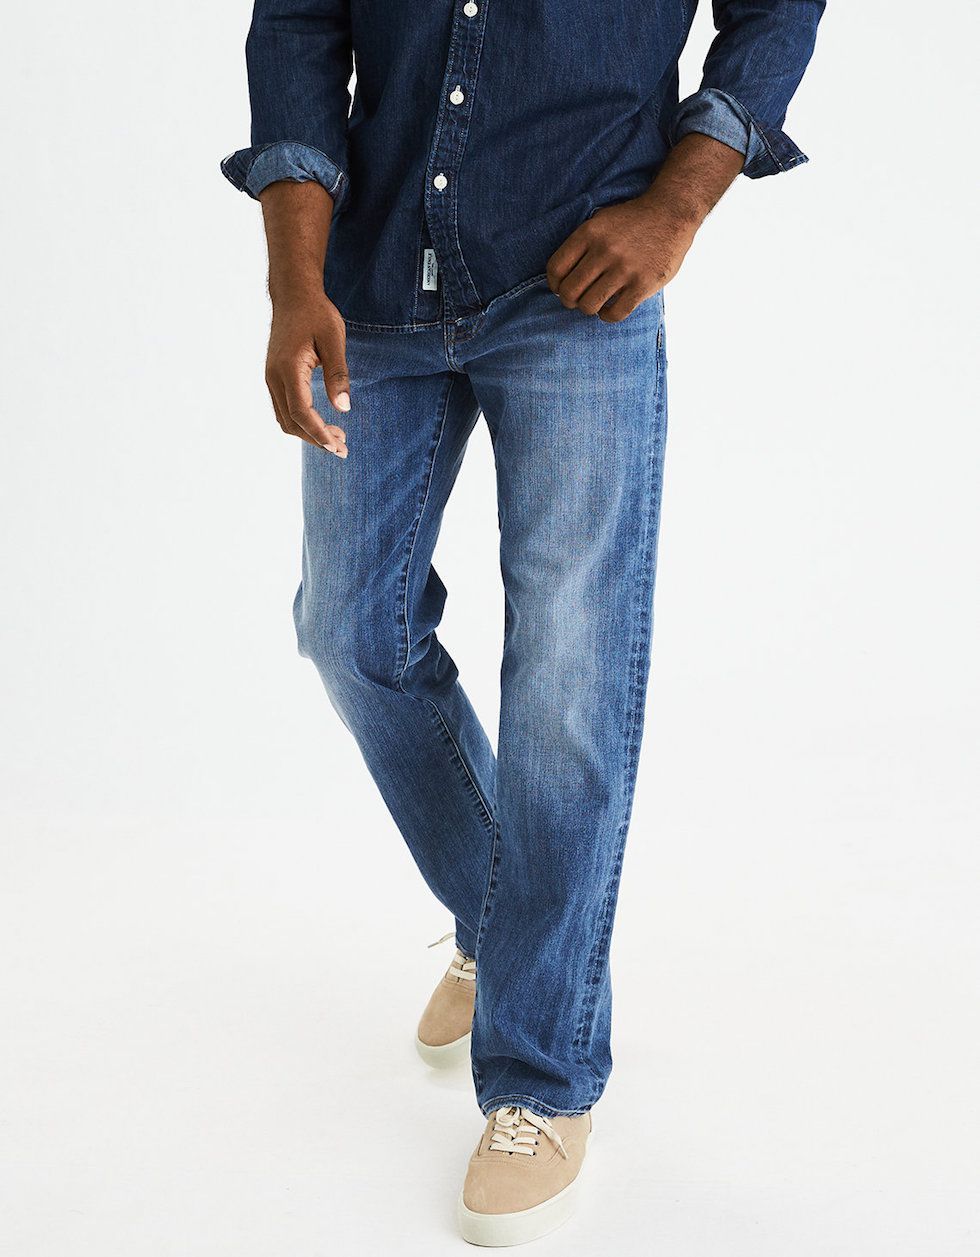 This American Eagle Jeans Sale Means Denim for $29